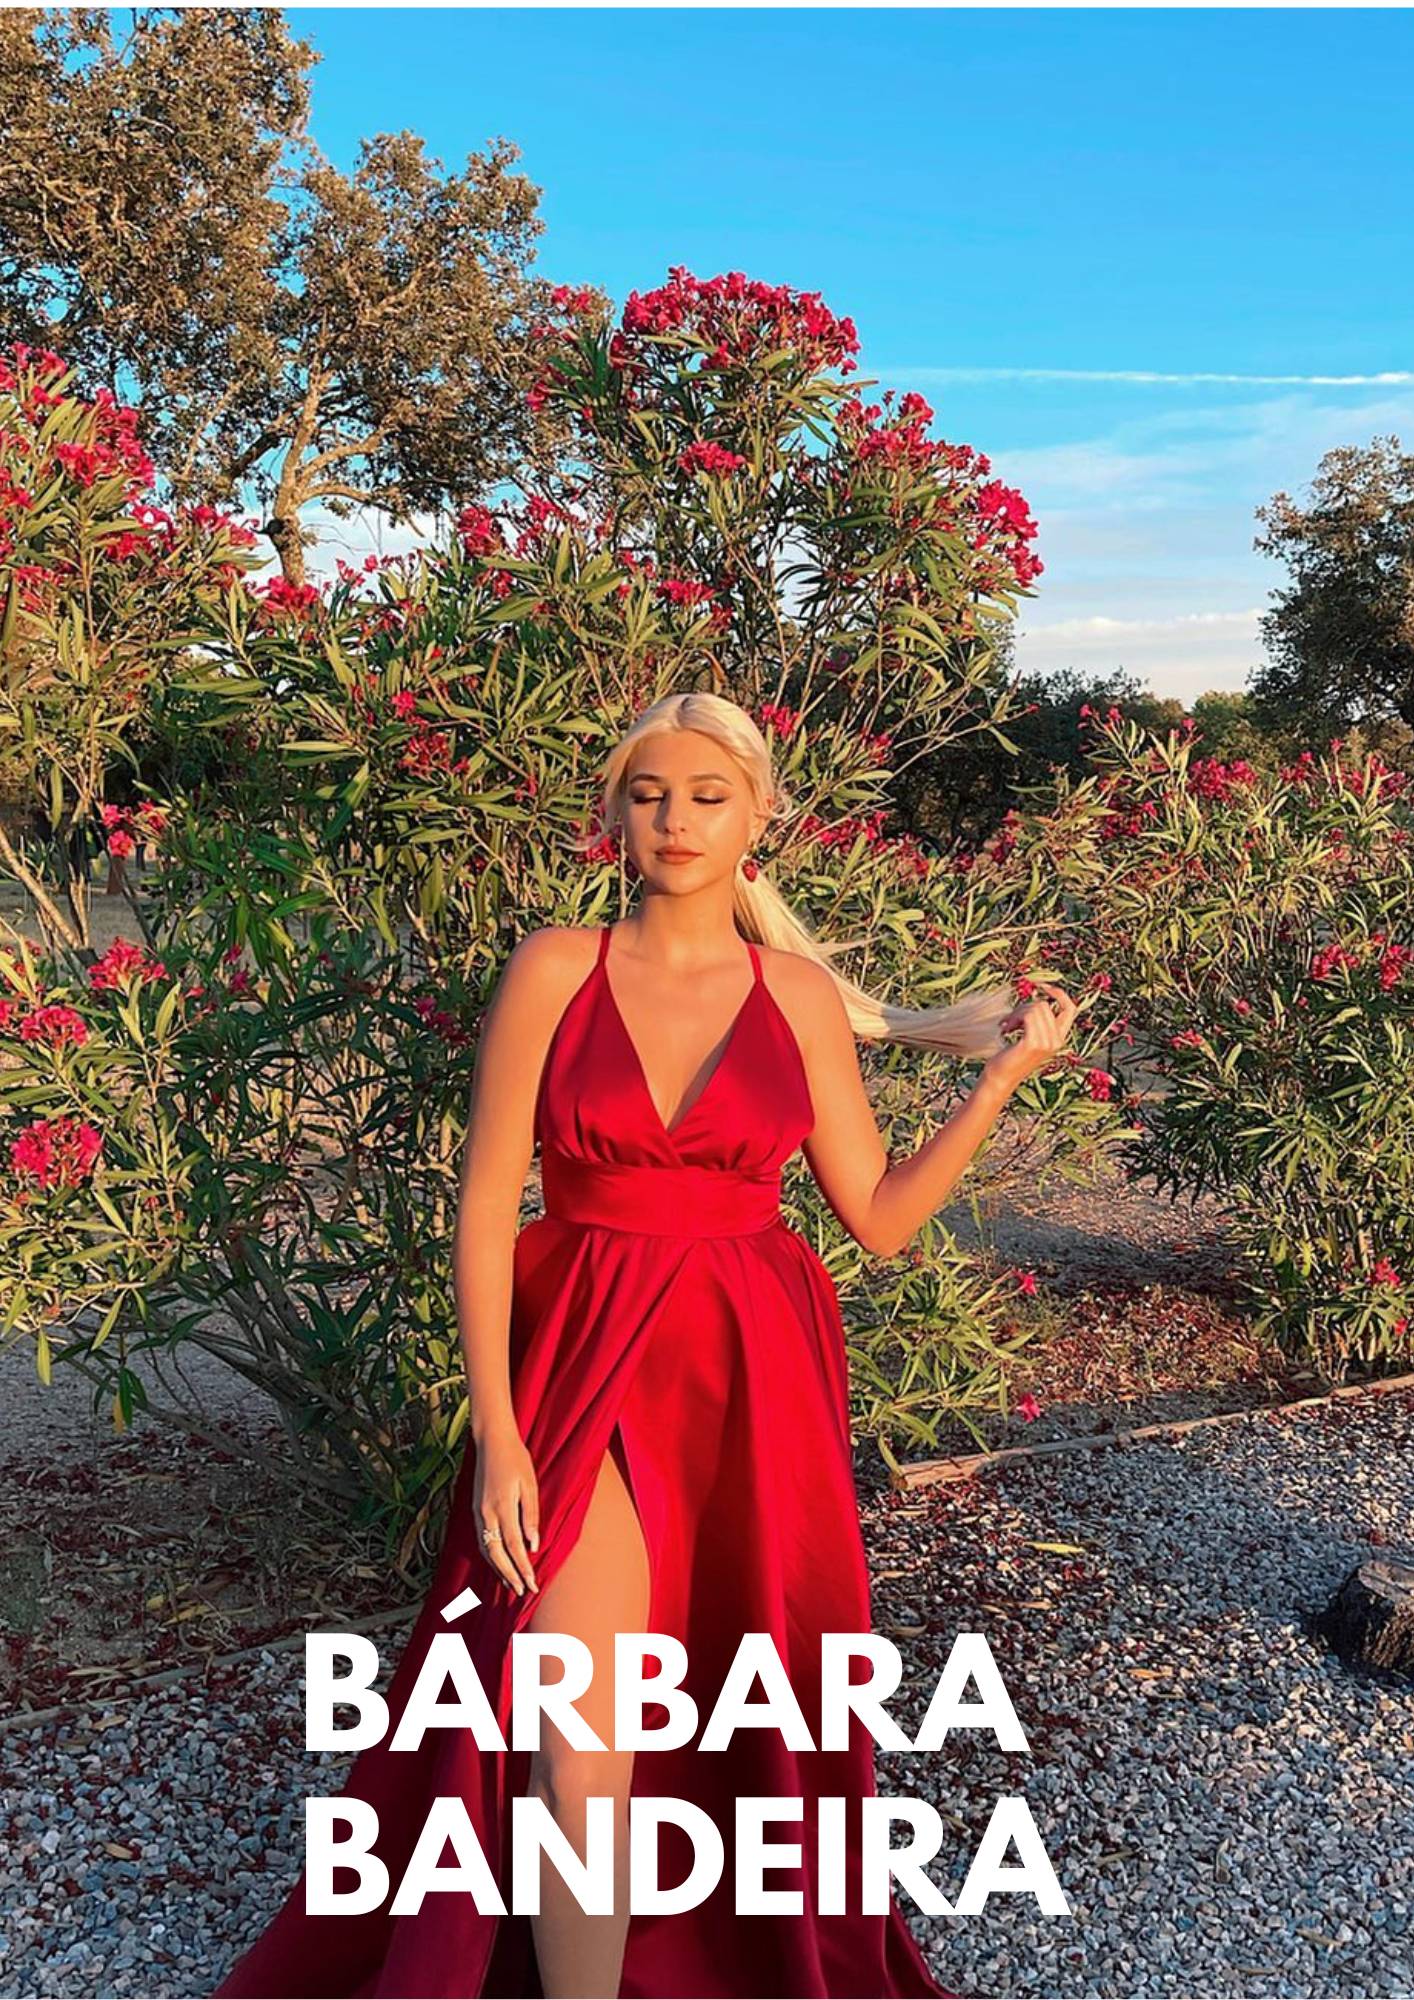 Portuguese singer Bárbara Bandeira in a luxury red dress by MAUÎ Official